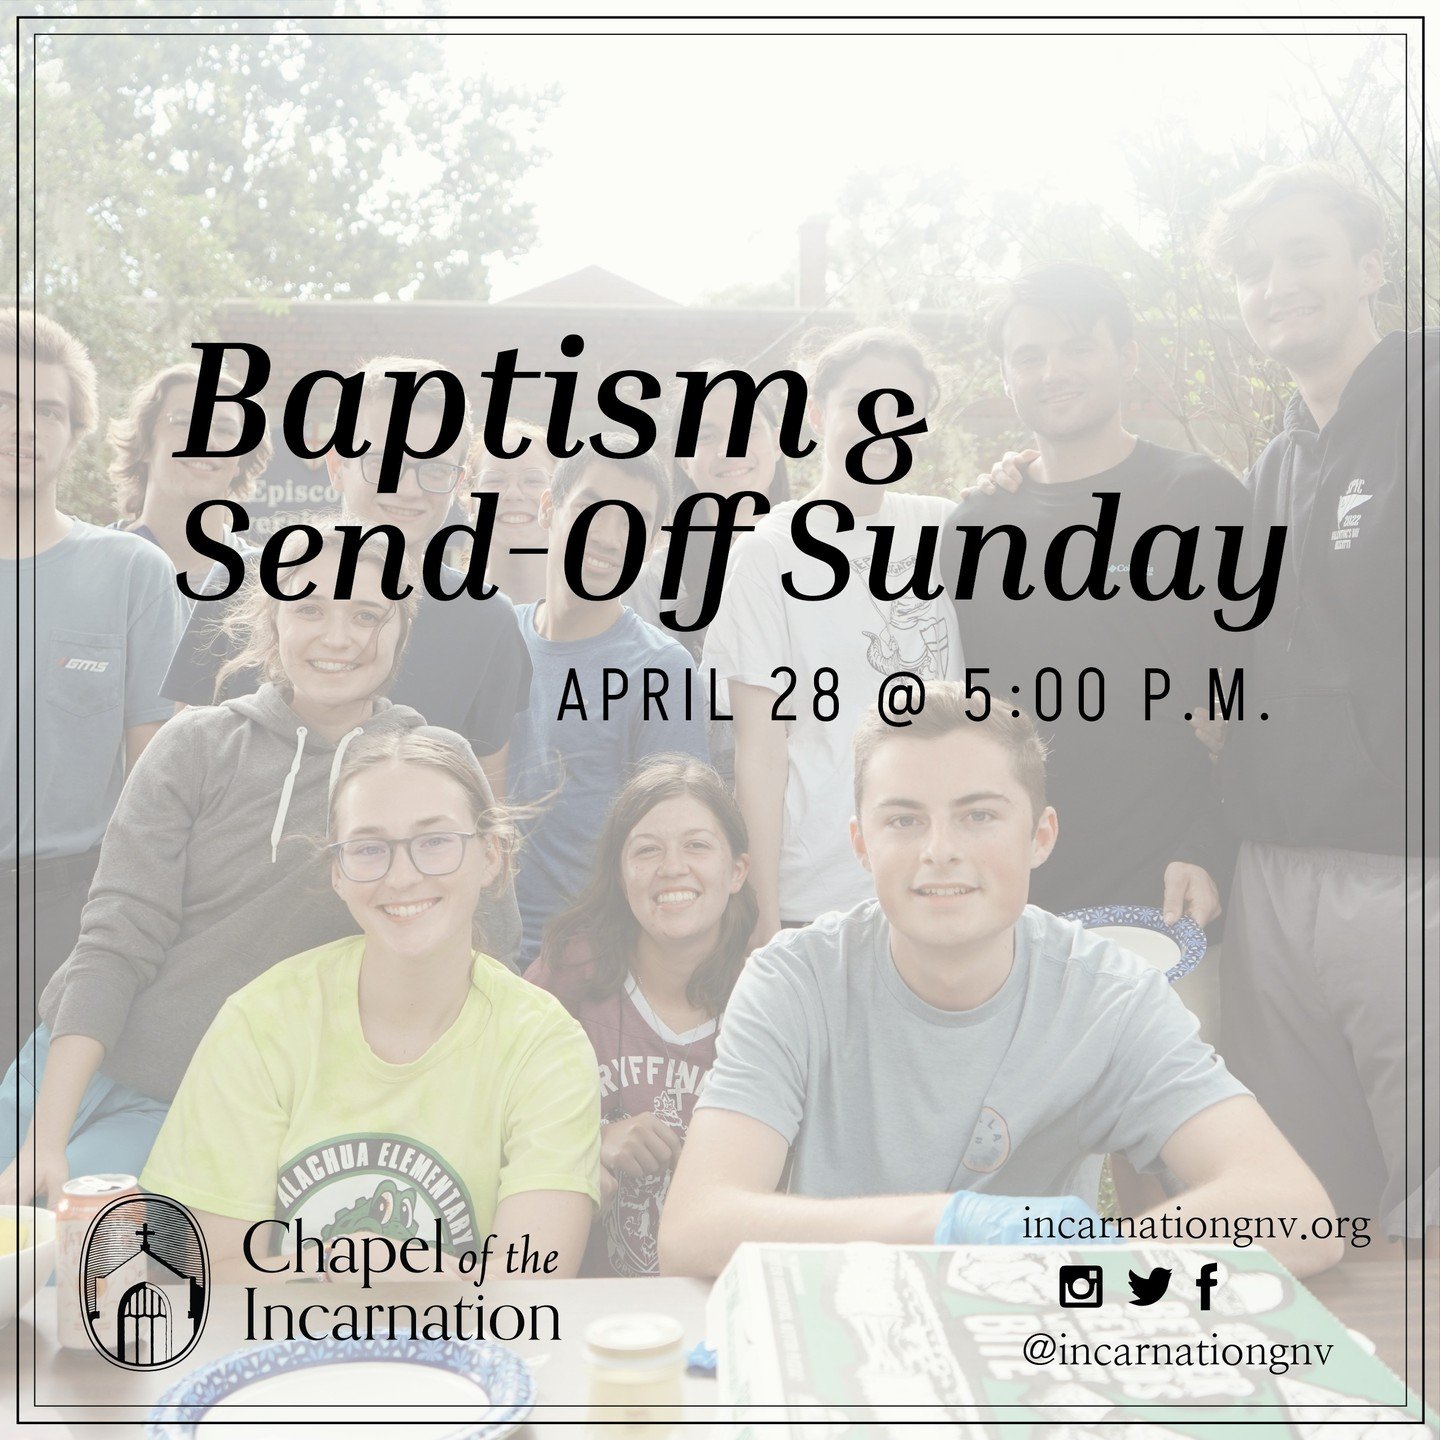 Join us tomorrow (April 28) at 5:00 p.m. for a service of Holy Communion and Baptism where we will send off all of our graduates!